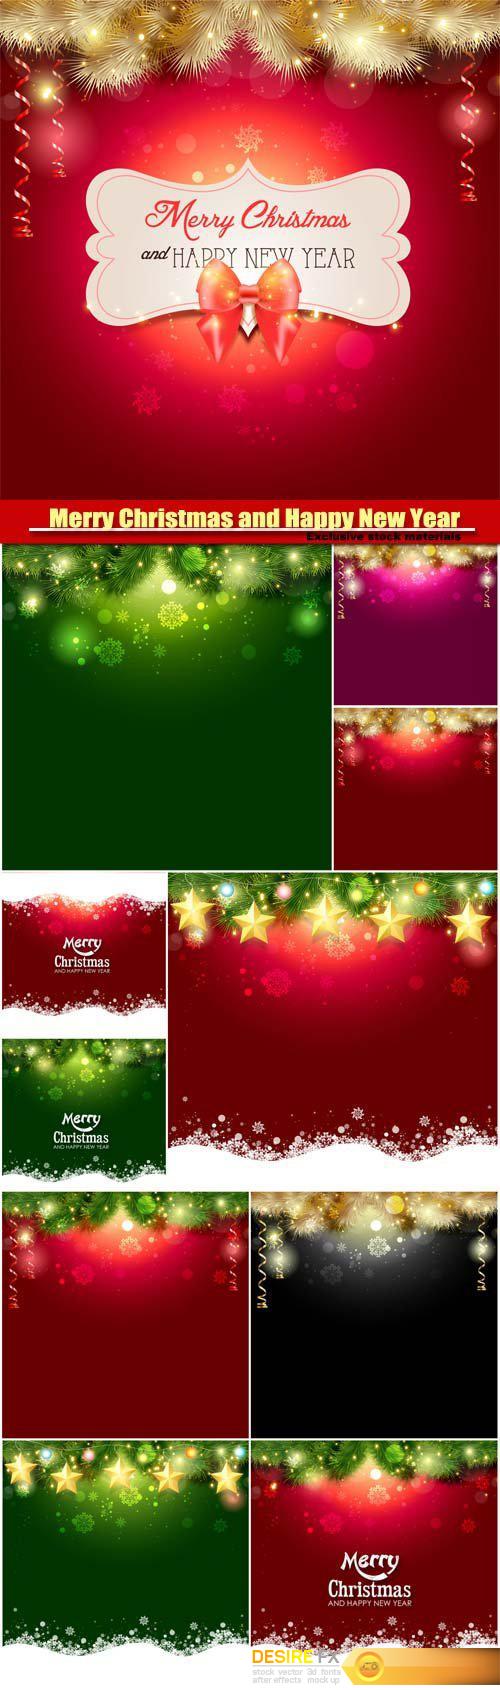 Merry Christmas and Happy New Year vector, background with a glowing effect